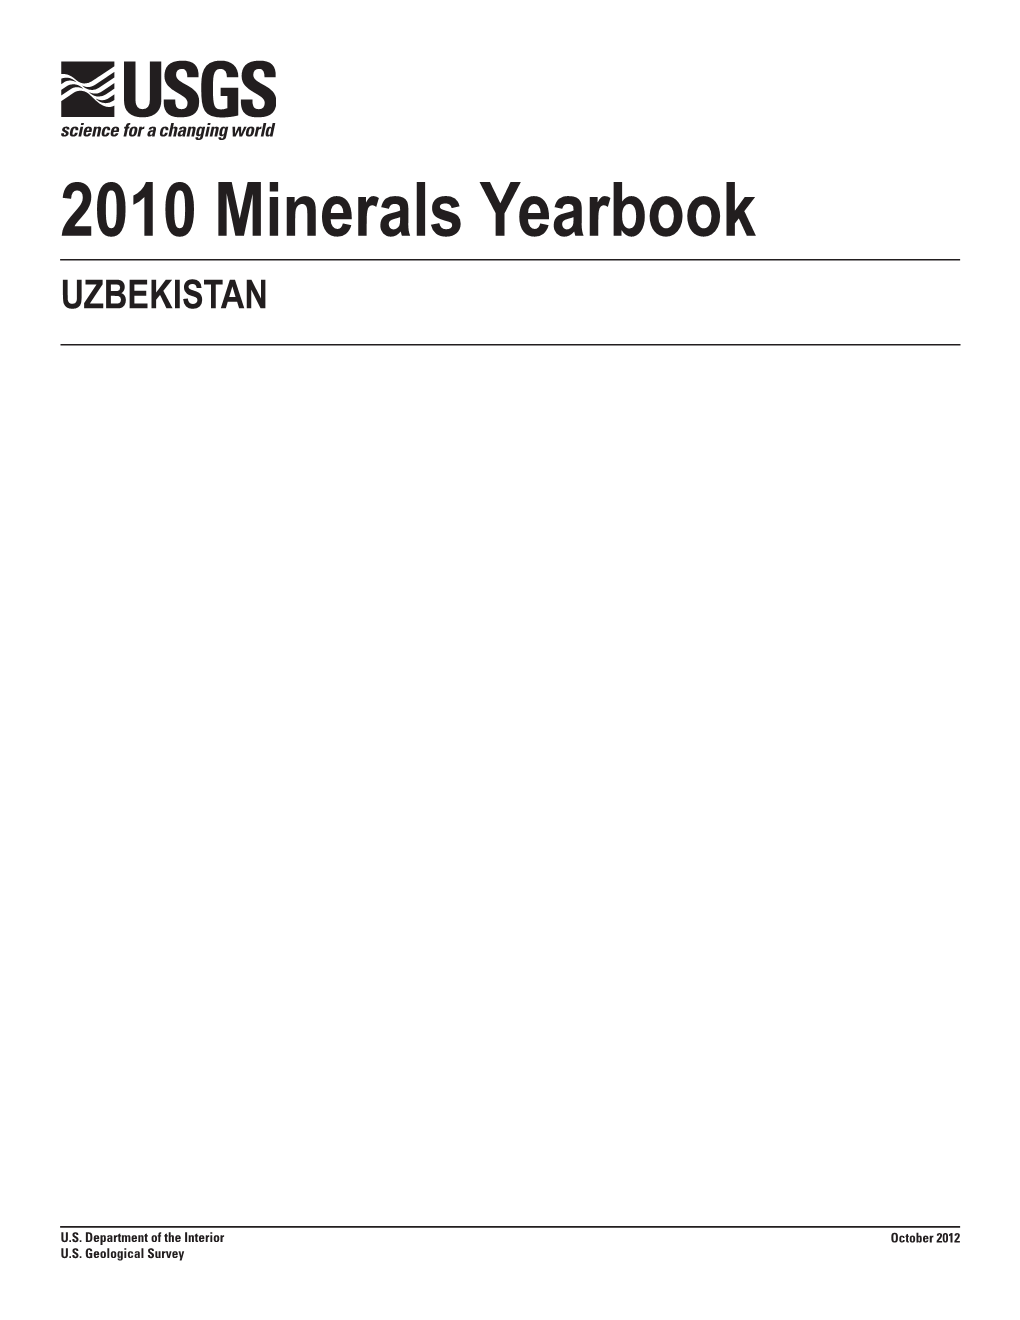 The Mineral Industry of Uzbekistan in 2010